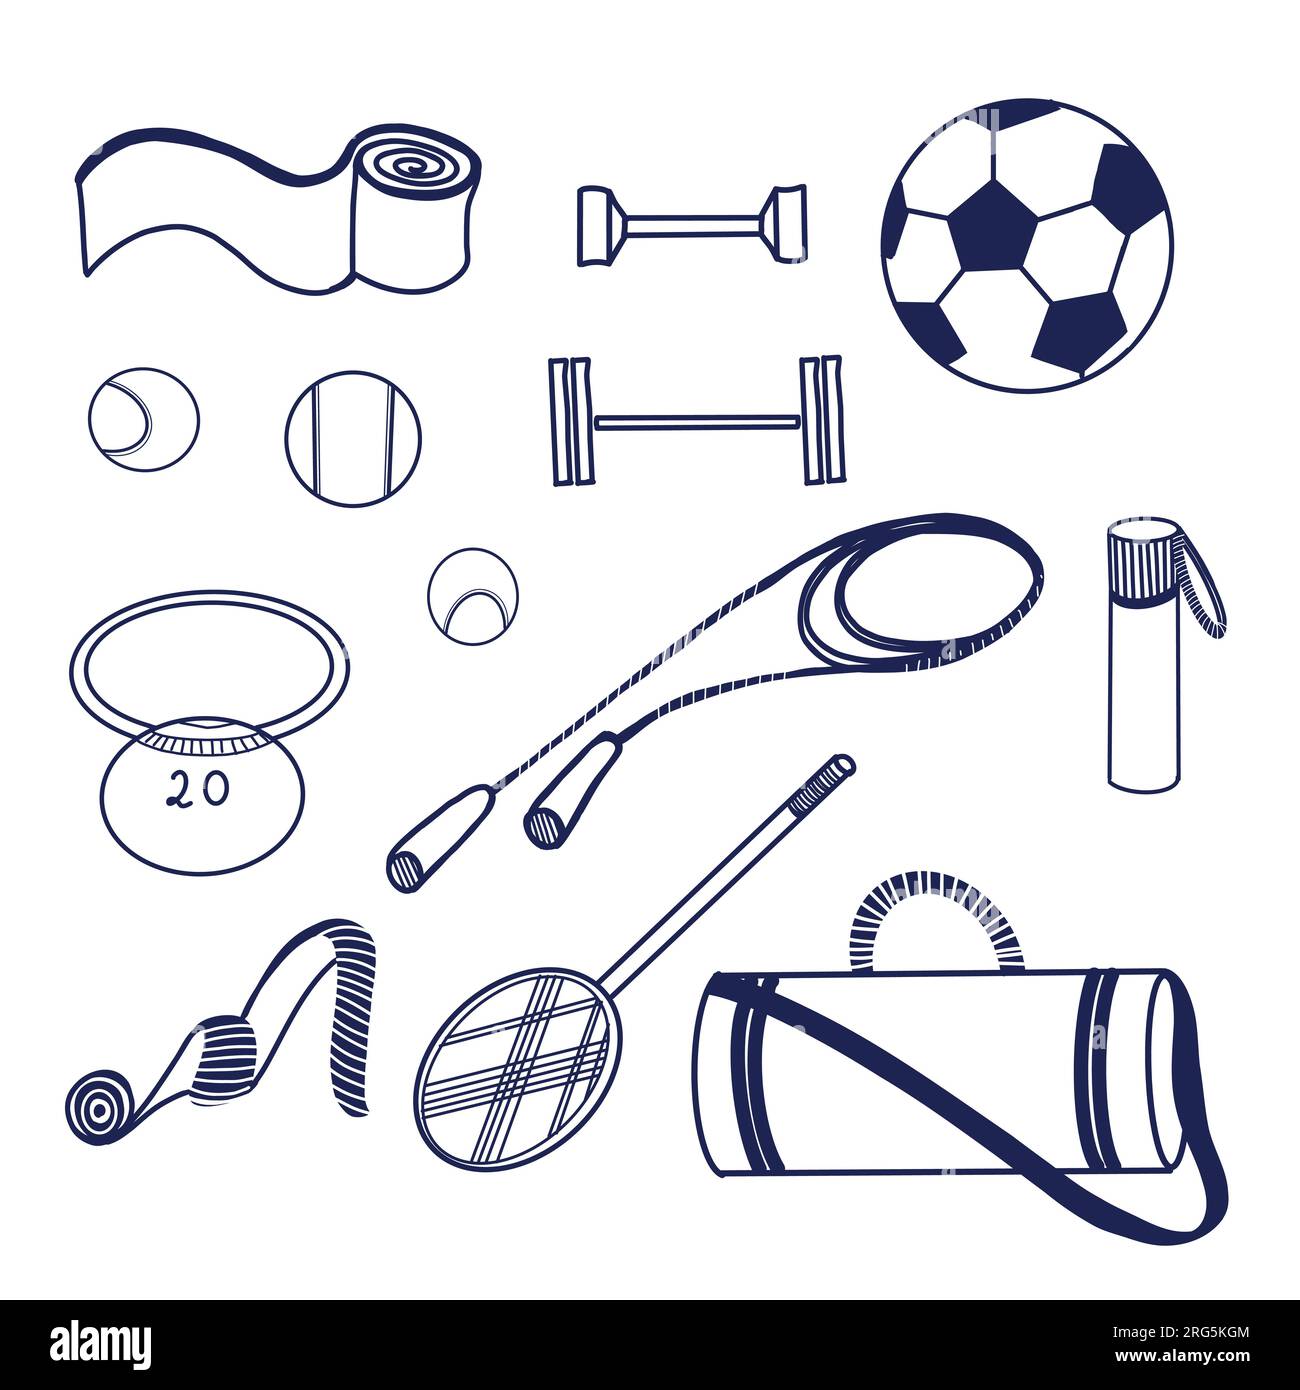 Set of illustrations. Sports equipment - tennis racket, dumbbells, bag, balls, jump rope, scales, water bottle, kettlebell drawn in vector on a tablet Stock Vector